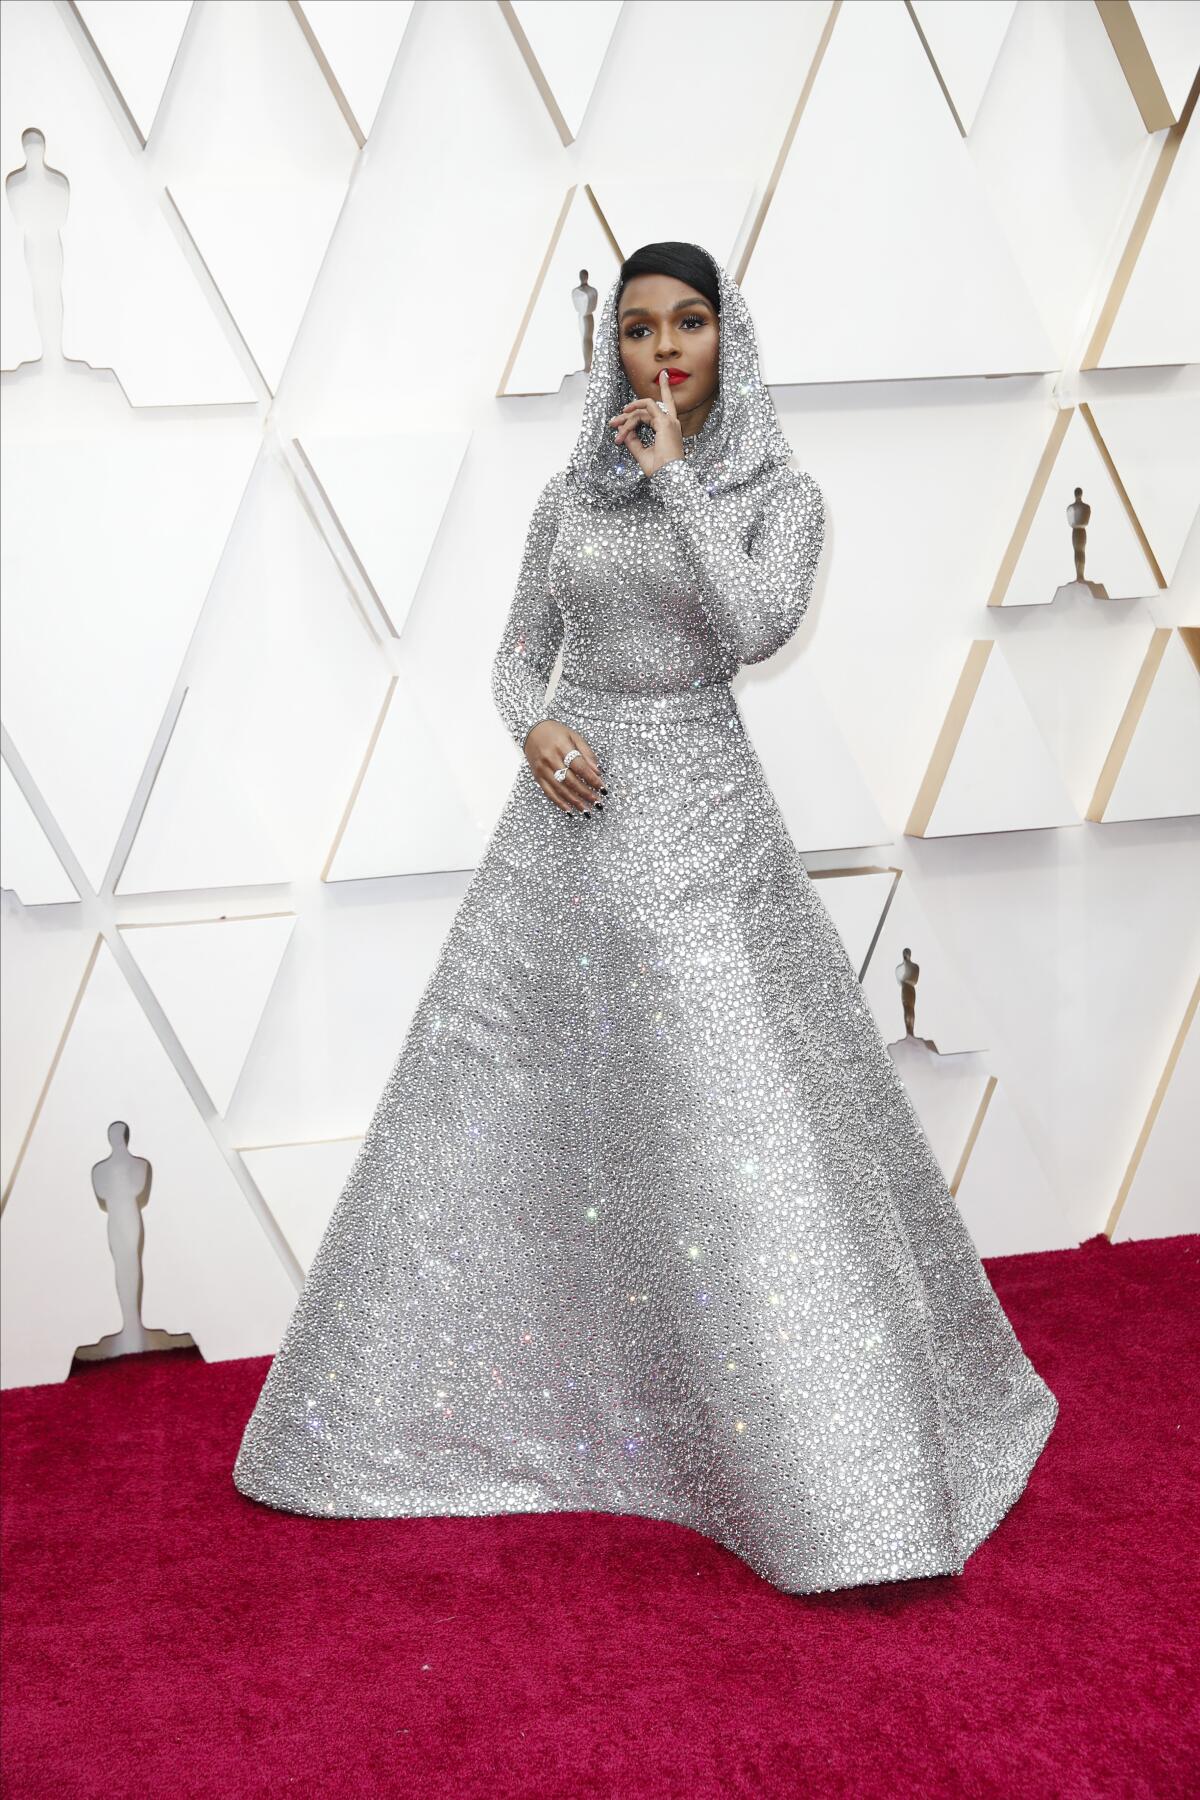 Janelle Monáe arriving at the 92nd Academy Awards.